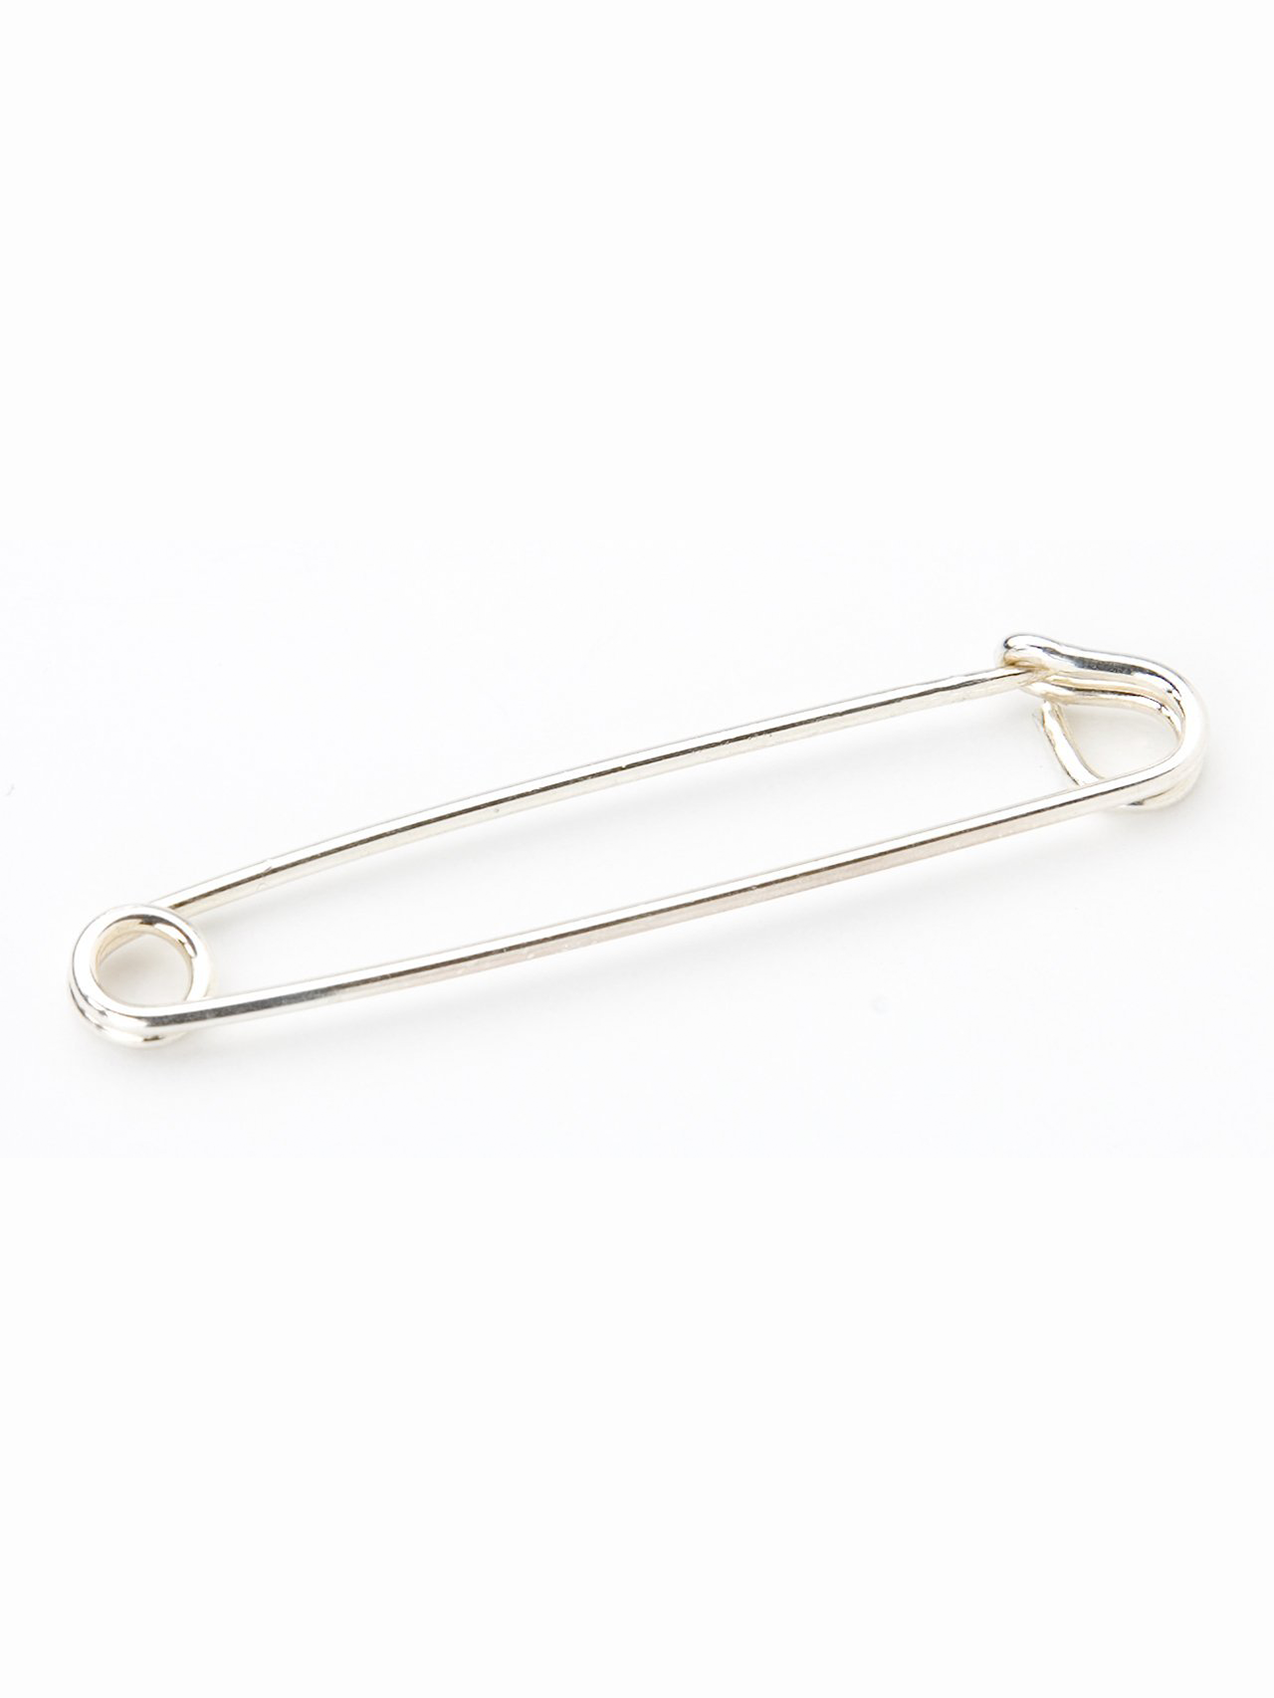 SAFETY PIN SILVER 2.5"